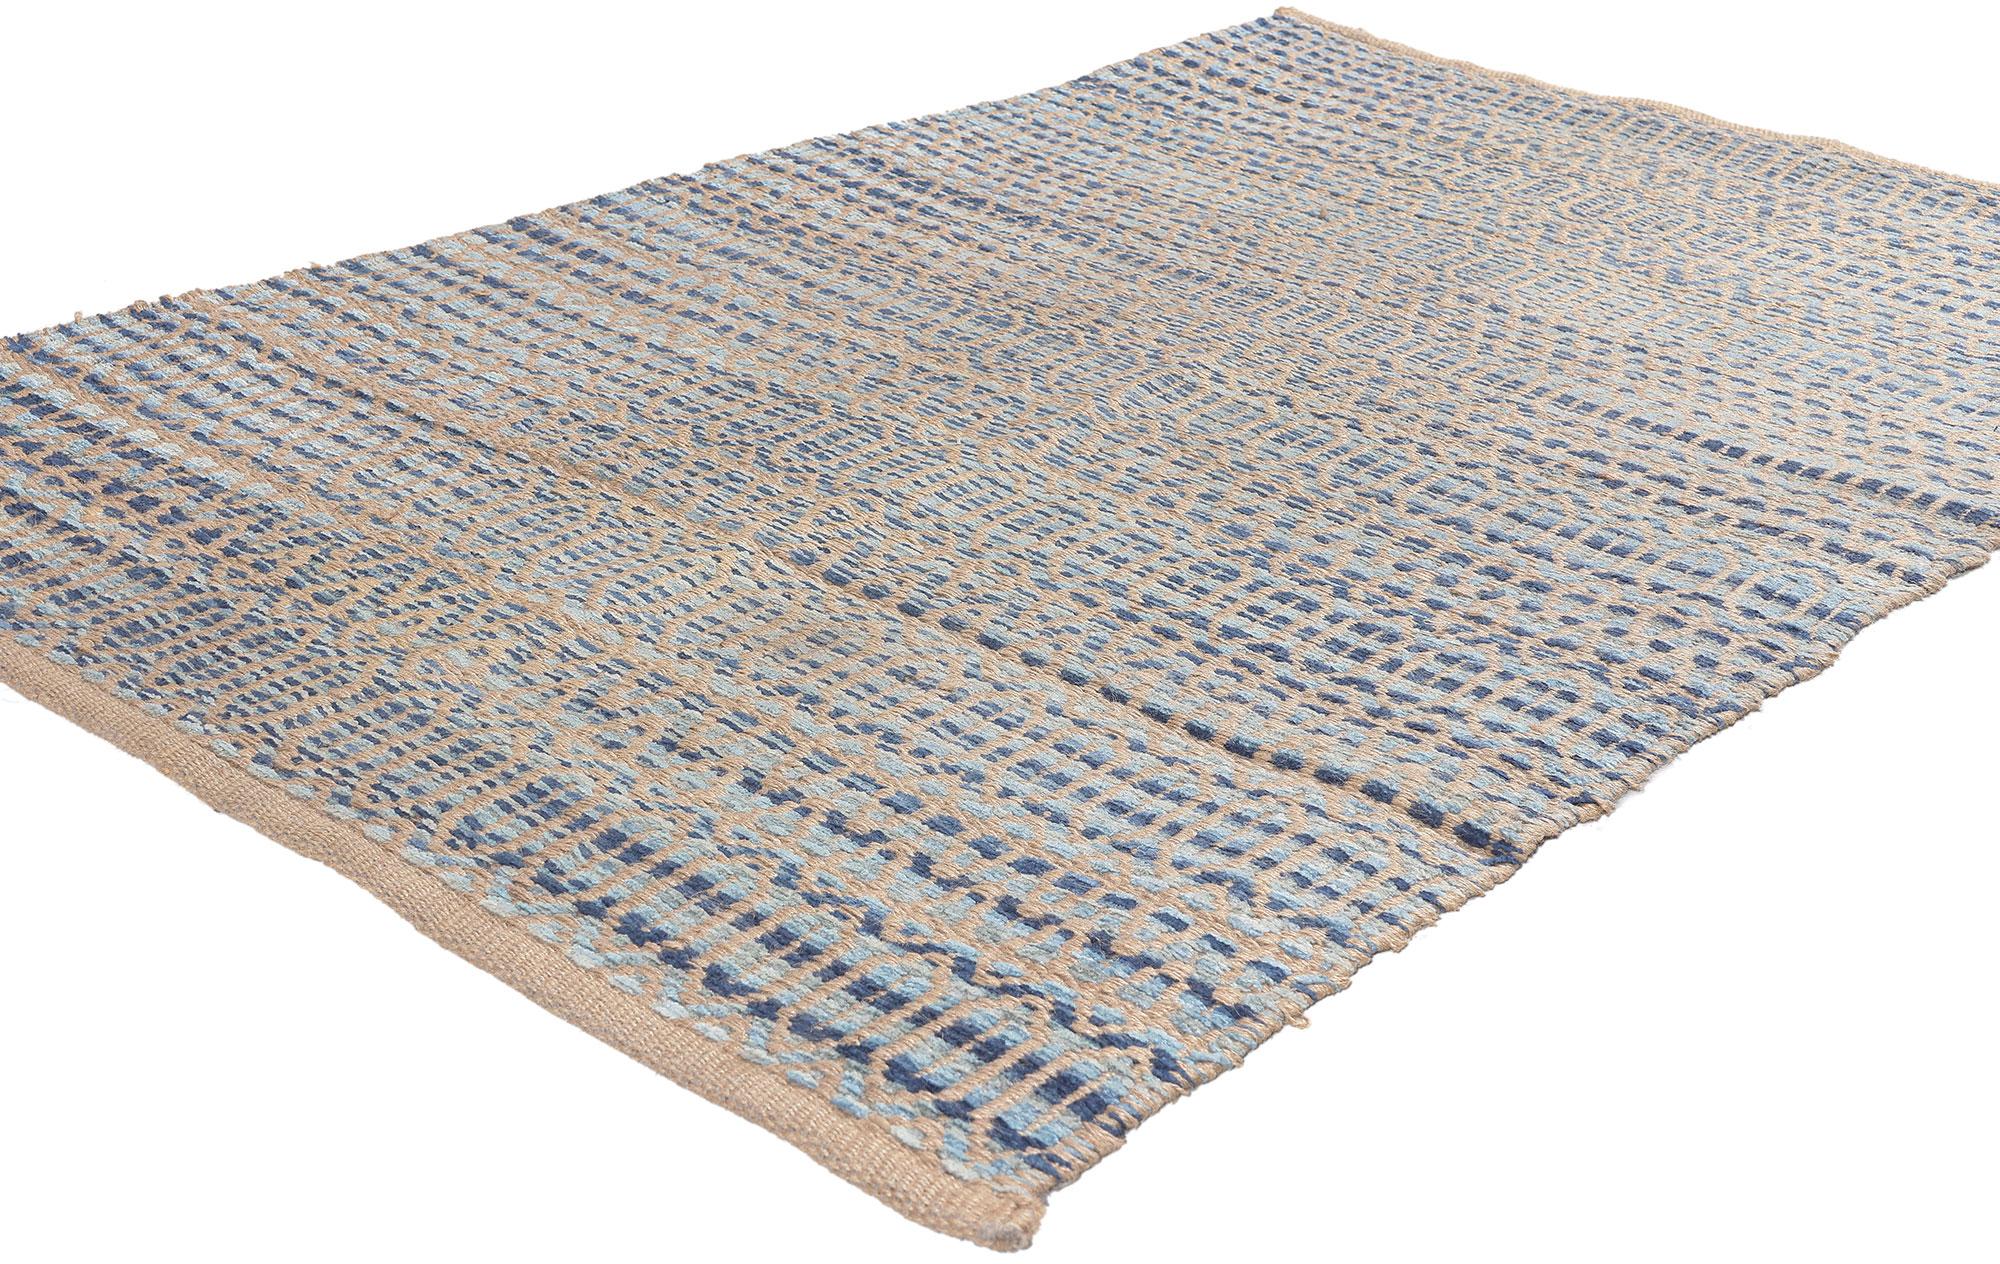 78546 Handwoven Natural Fiber Jute Rug, 03'01 x 5'00.
​Emanating refined boho style with incredible detail and texture, this handwoven jute rug is a captivating vision of woven beauty. The geometric design and happy colorway woven into this piece